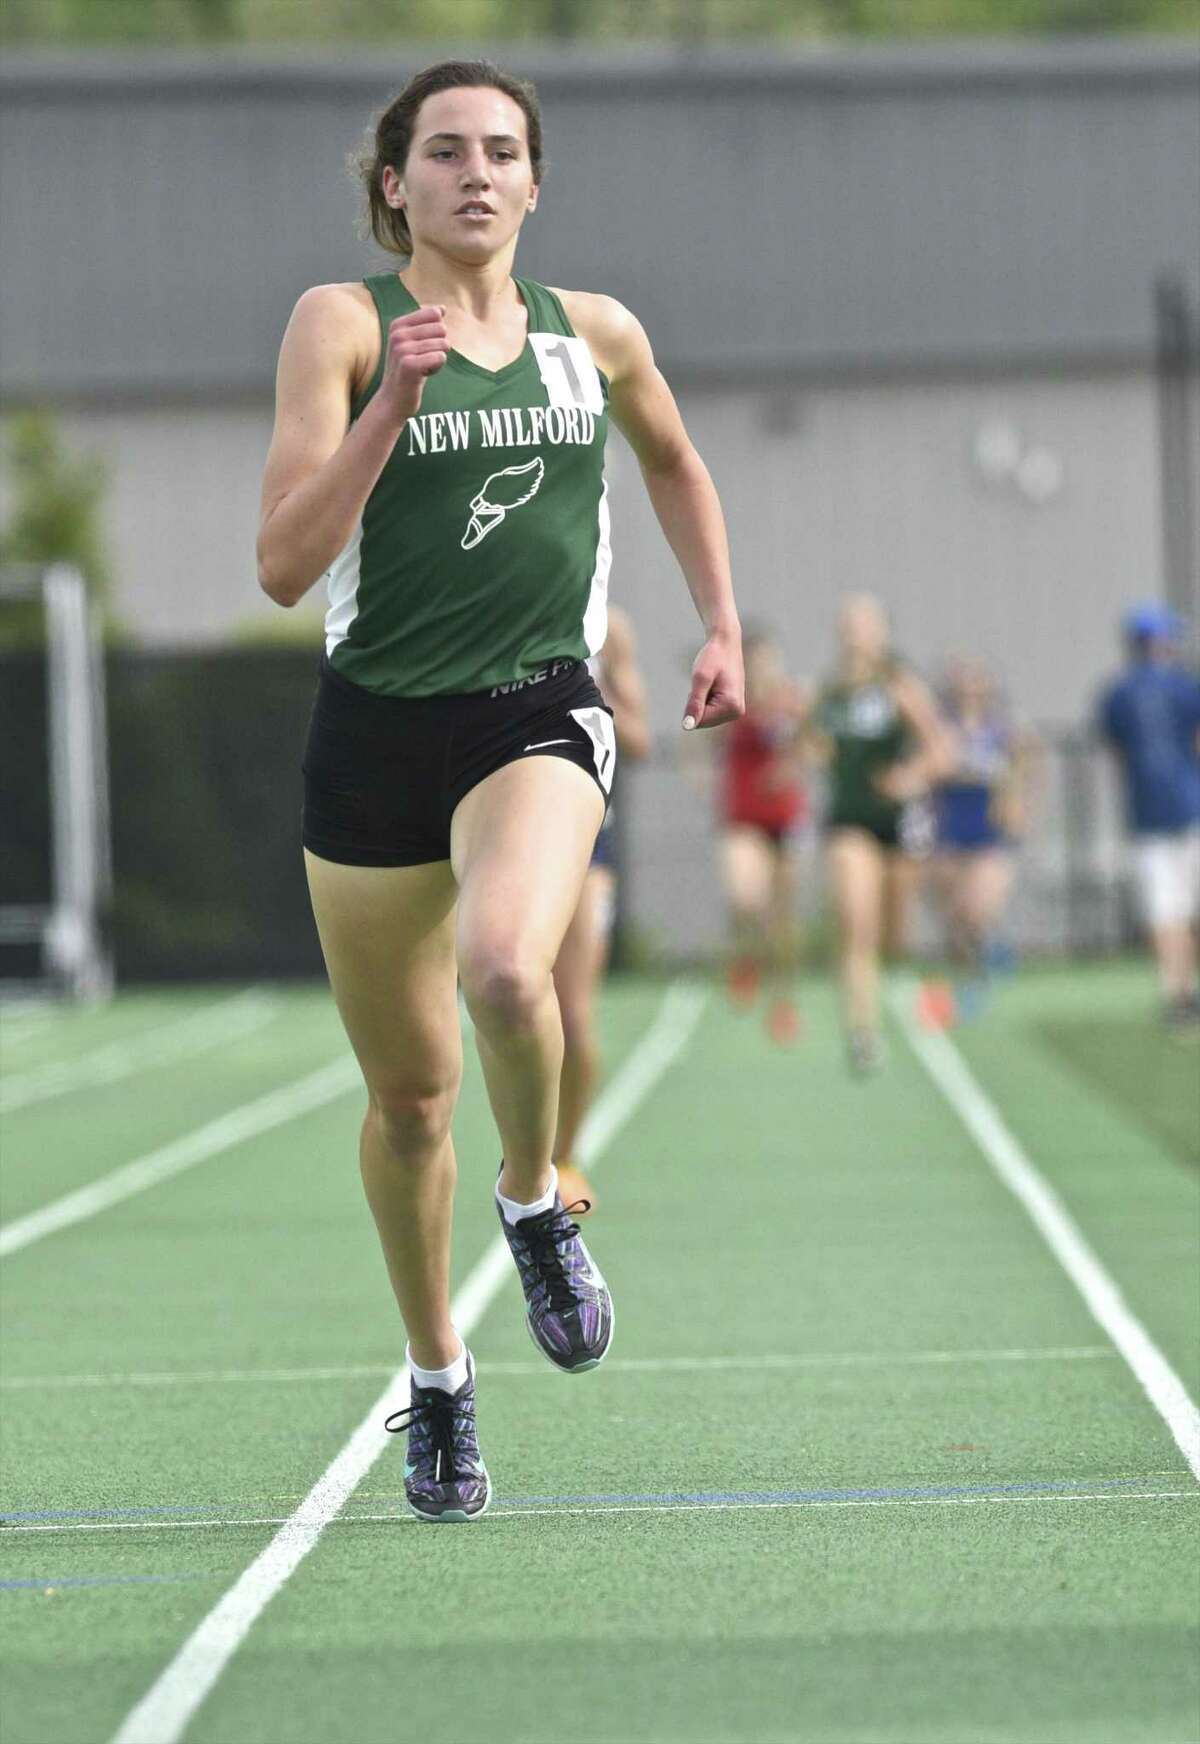 New Milford’s Mia Nahom was voted the Hearst Connecticut Media’s girls track MVP.